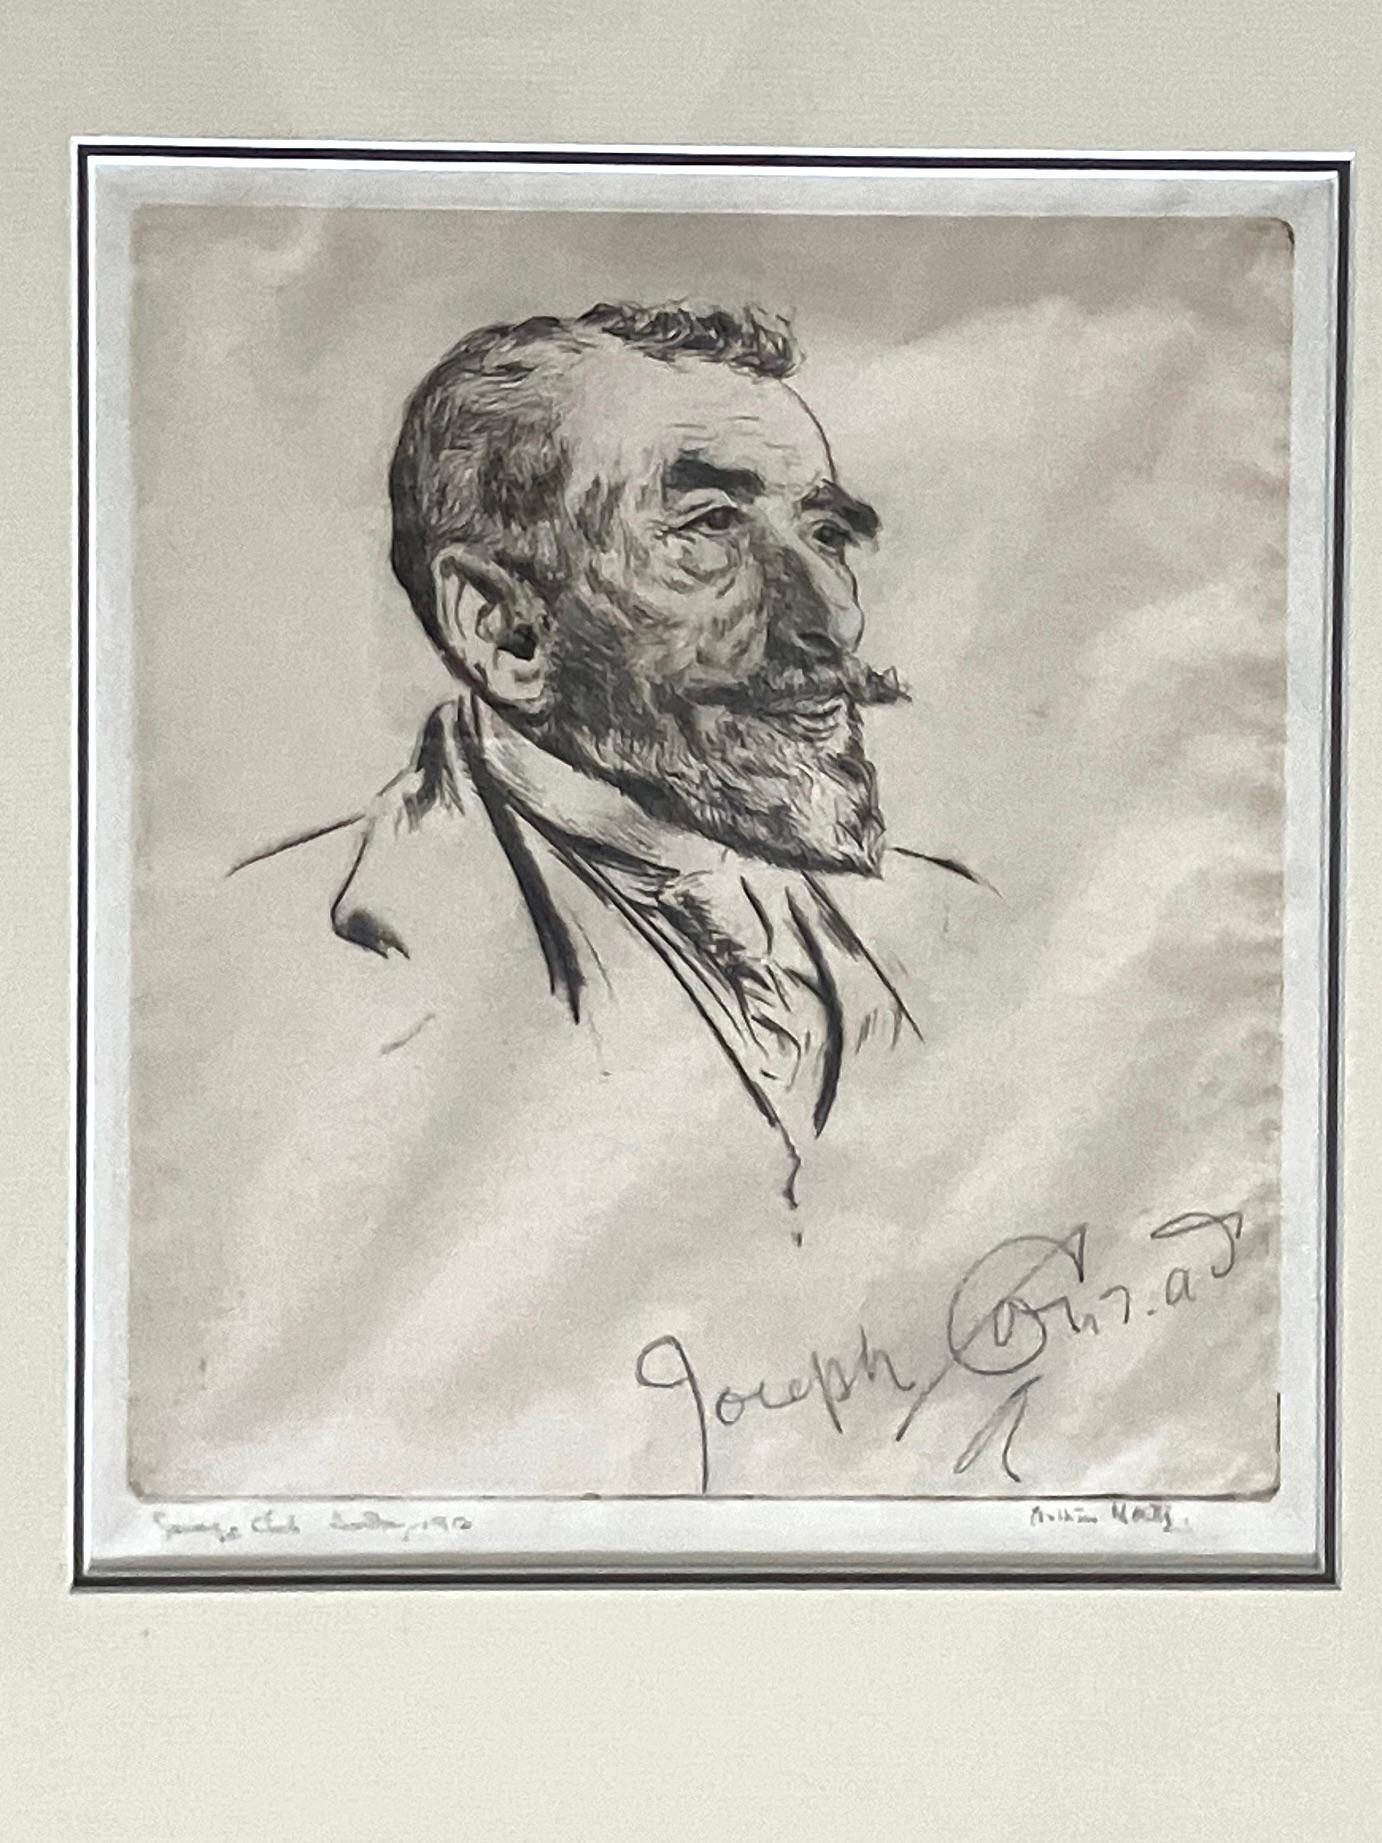 American Arthur Wm. North (English) Etching of Joseph Conrad Dated 1912 Signed by Conrad For Sale